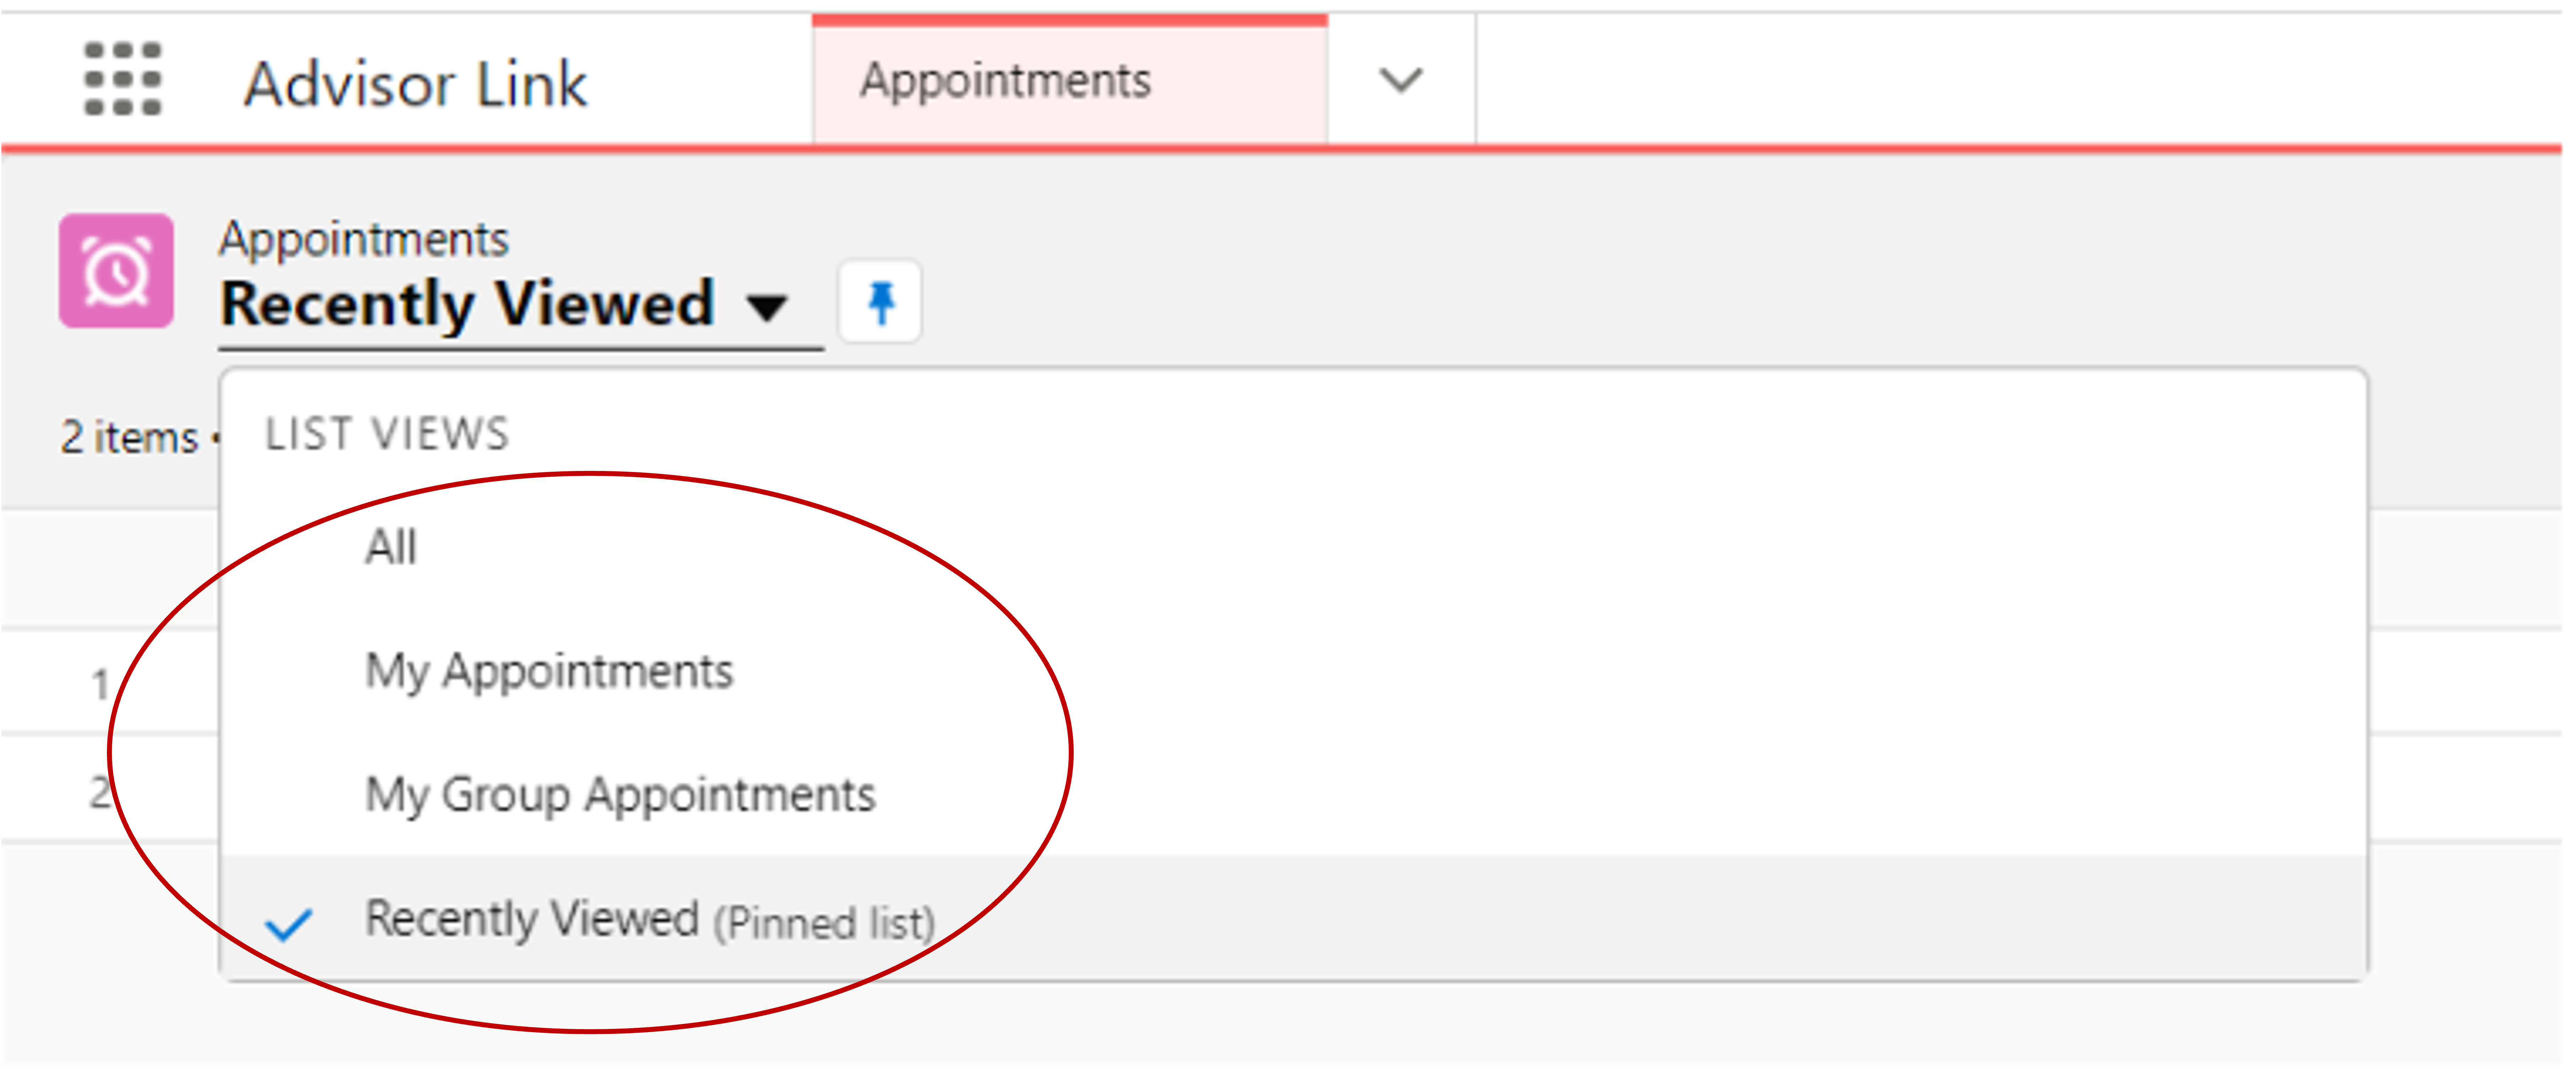 Viewing the Appointment Types